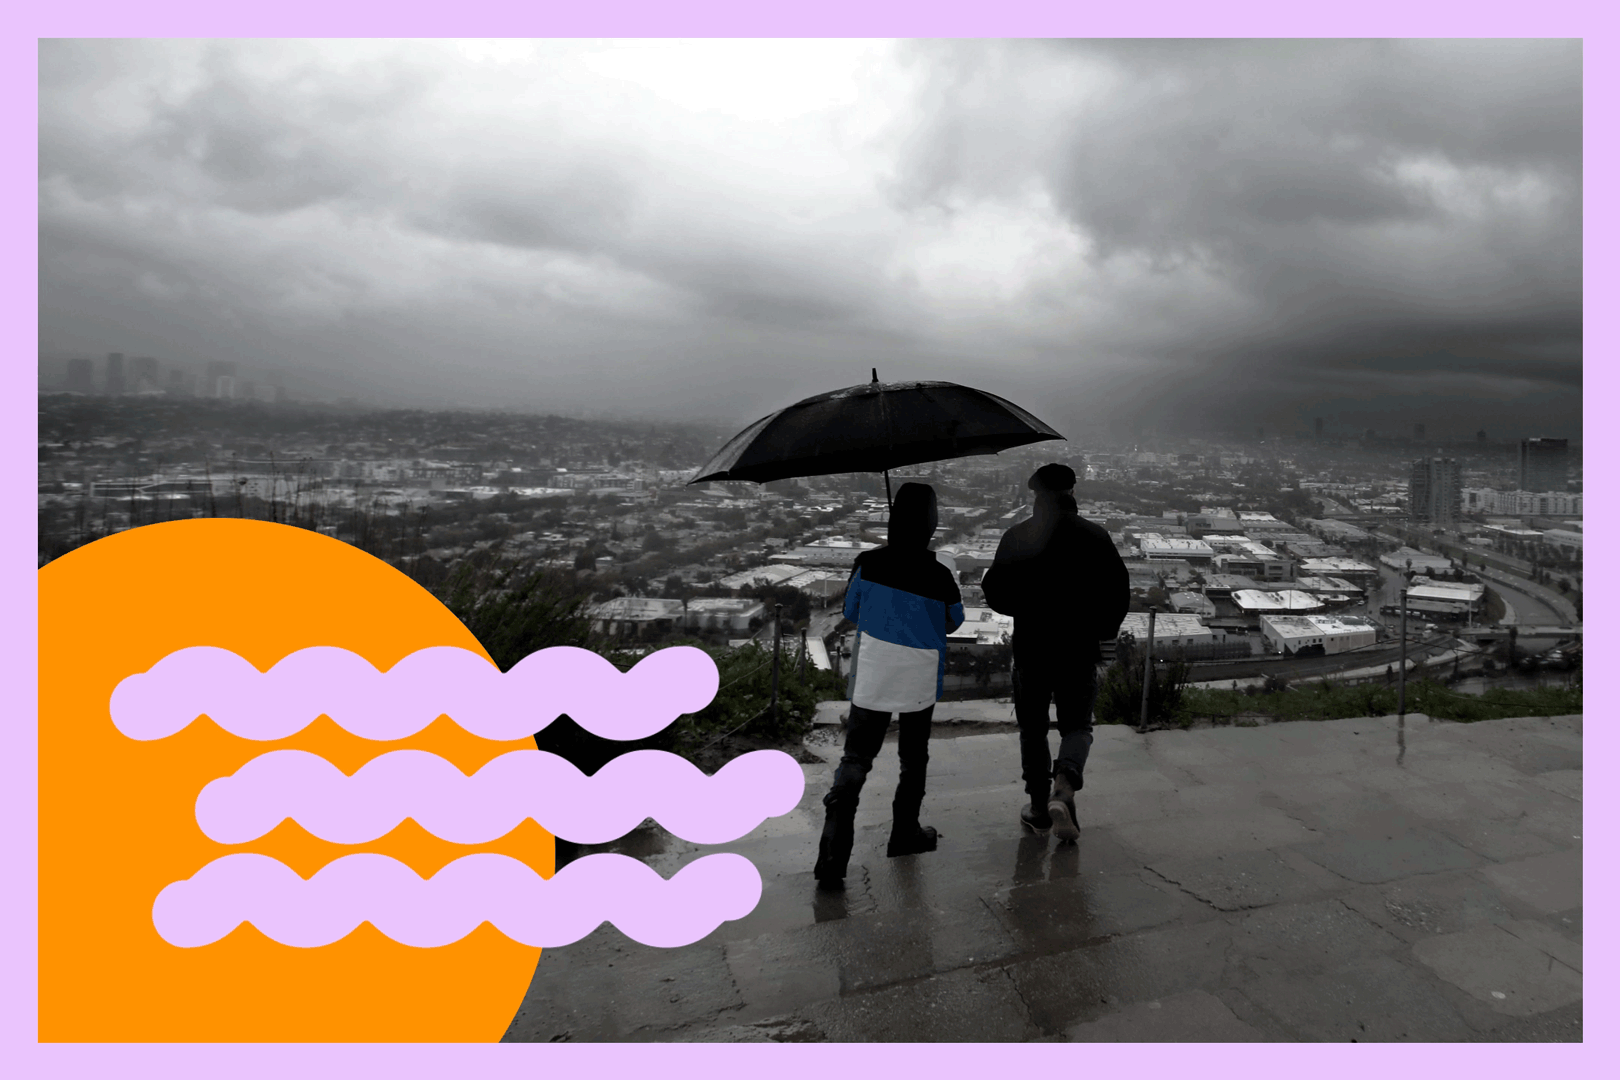 Warren, right, and his son Johnny, take in the view of a passing storm from the Baldwin Hills Scenic Overlook in Culver City